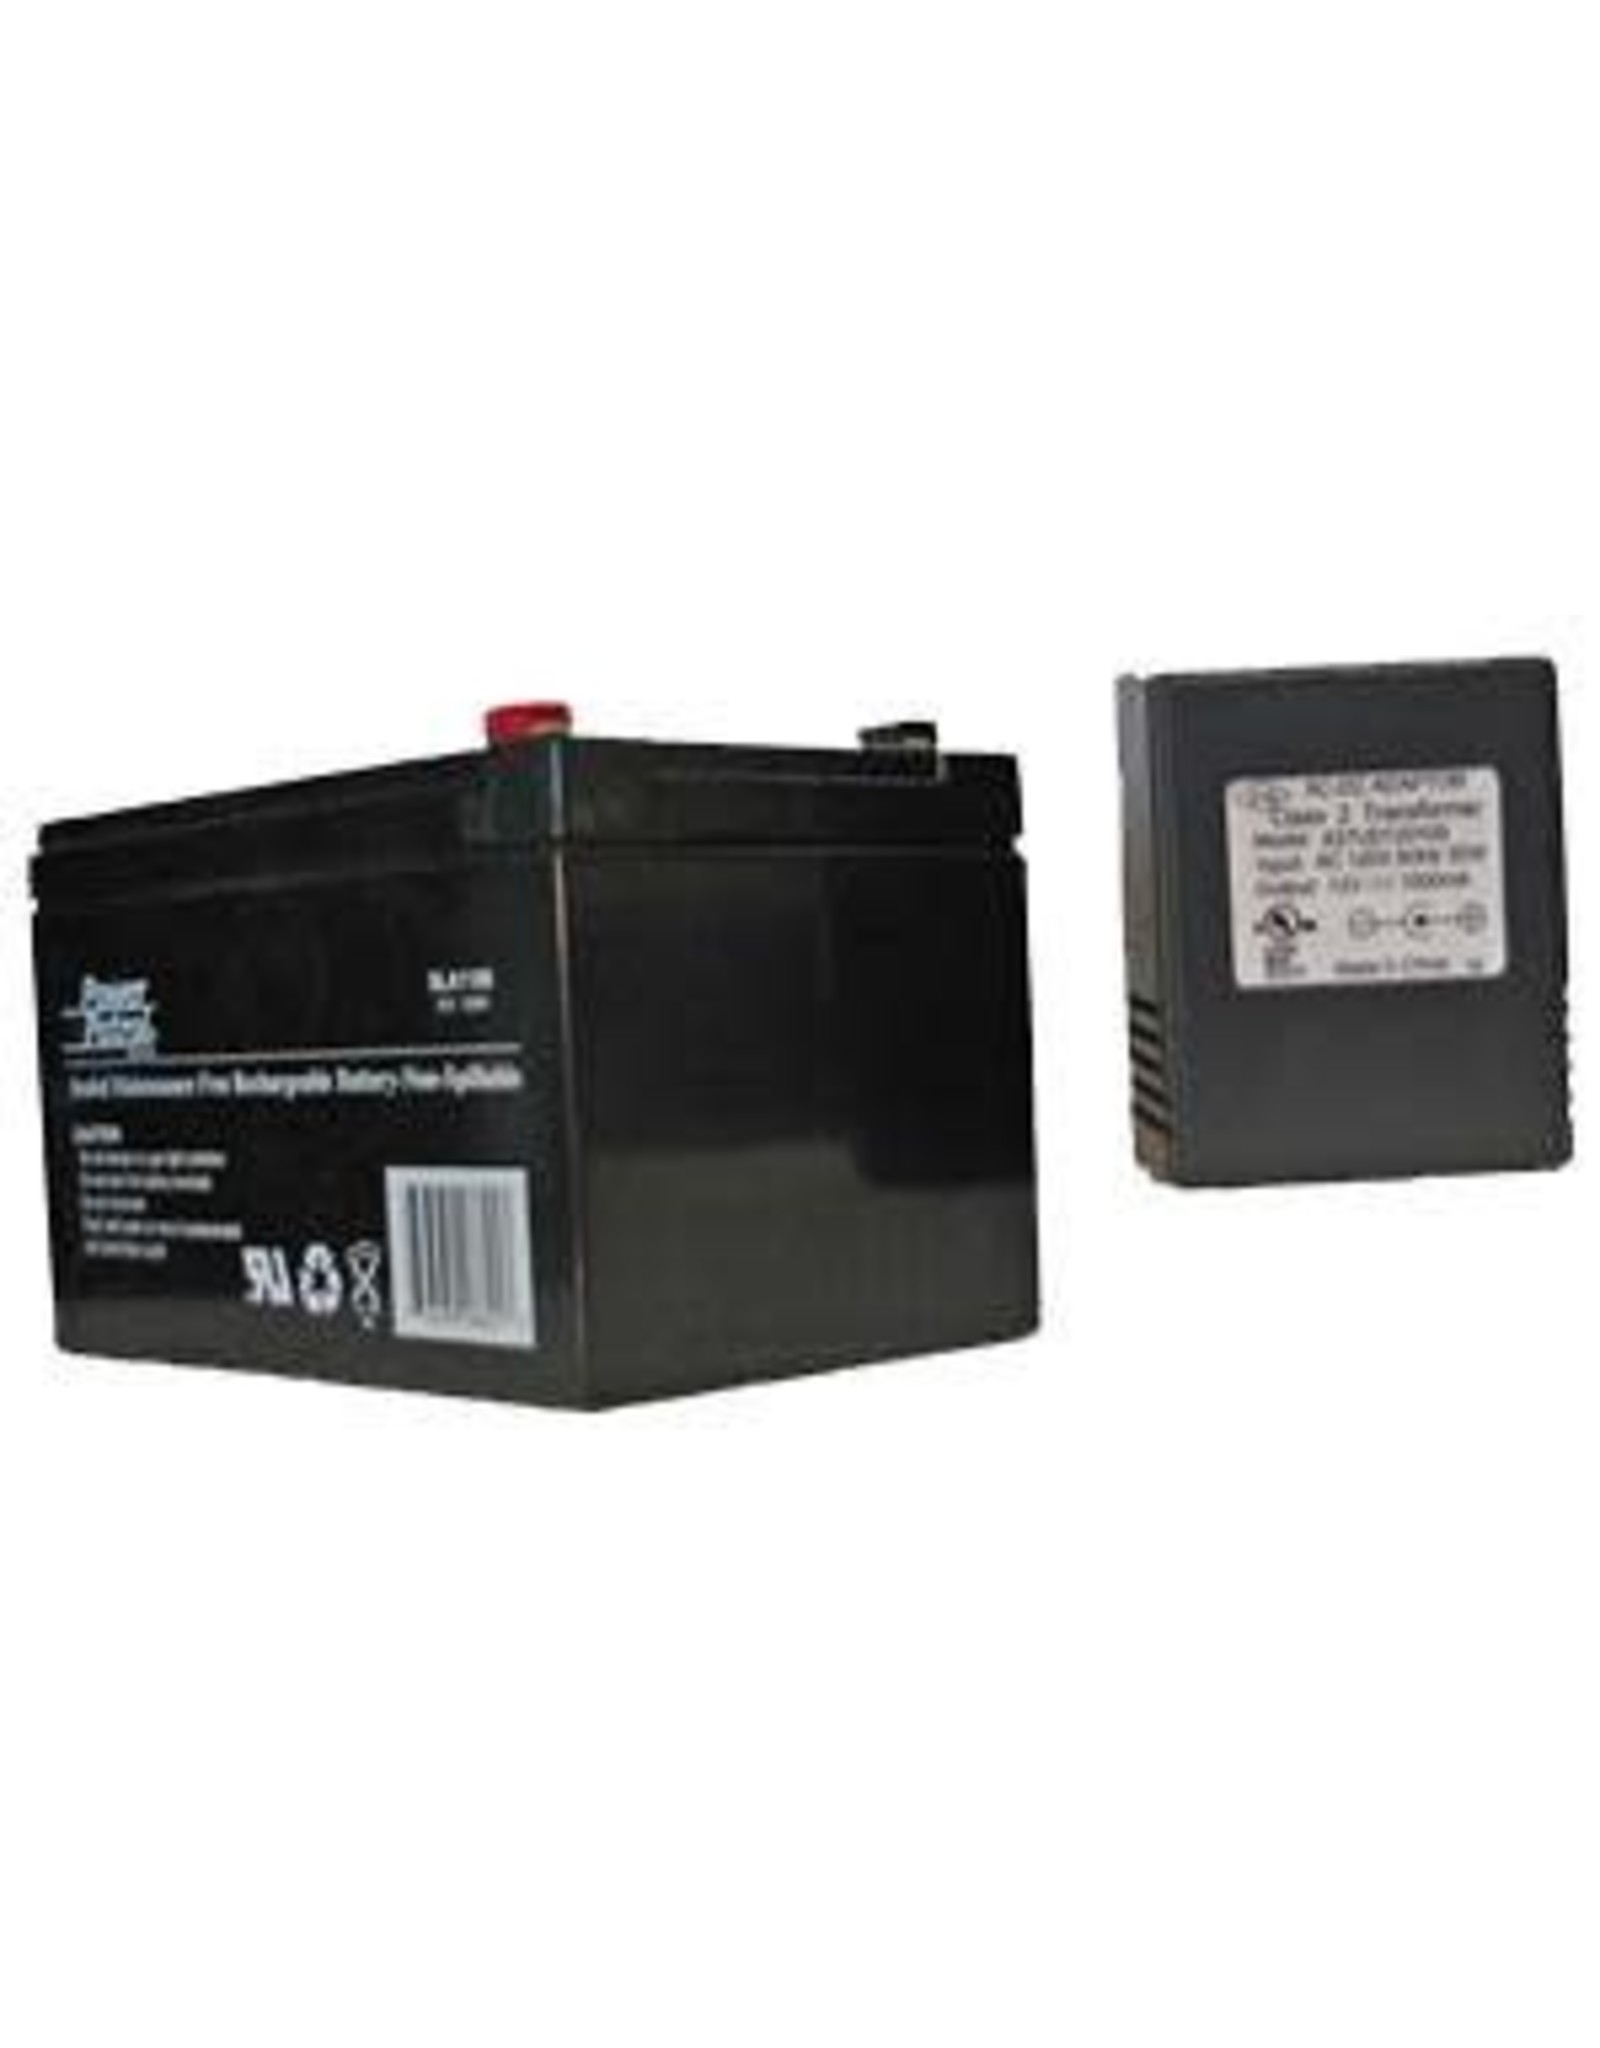 Takahashi Takahashi 12V/12AH Gel Cell Battery with Charger